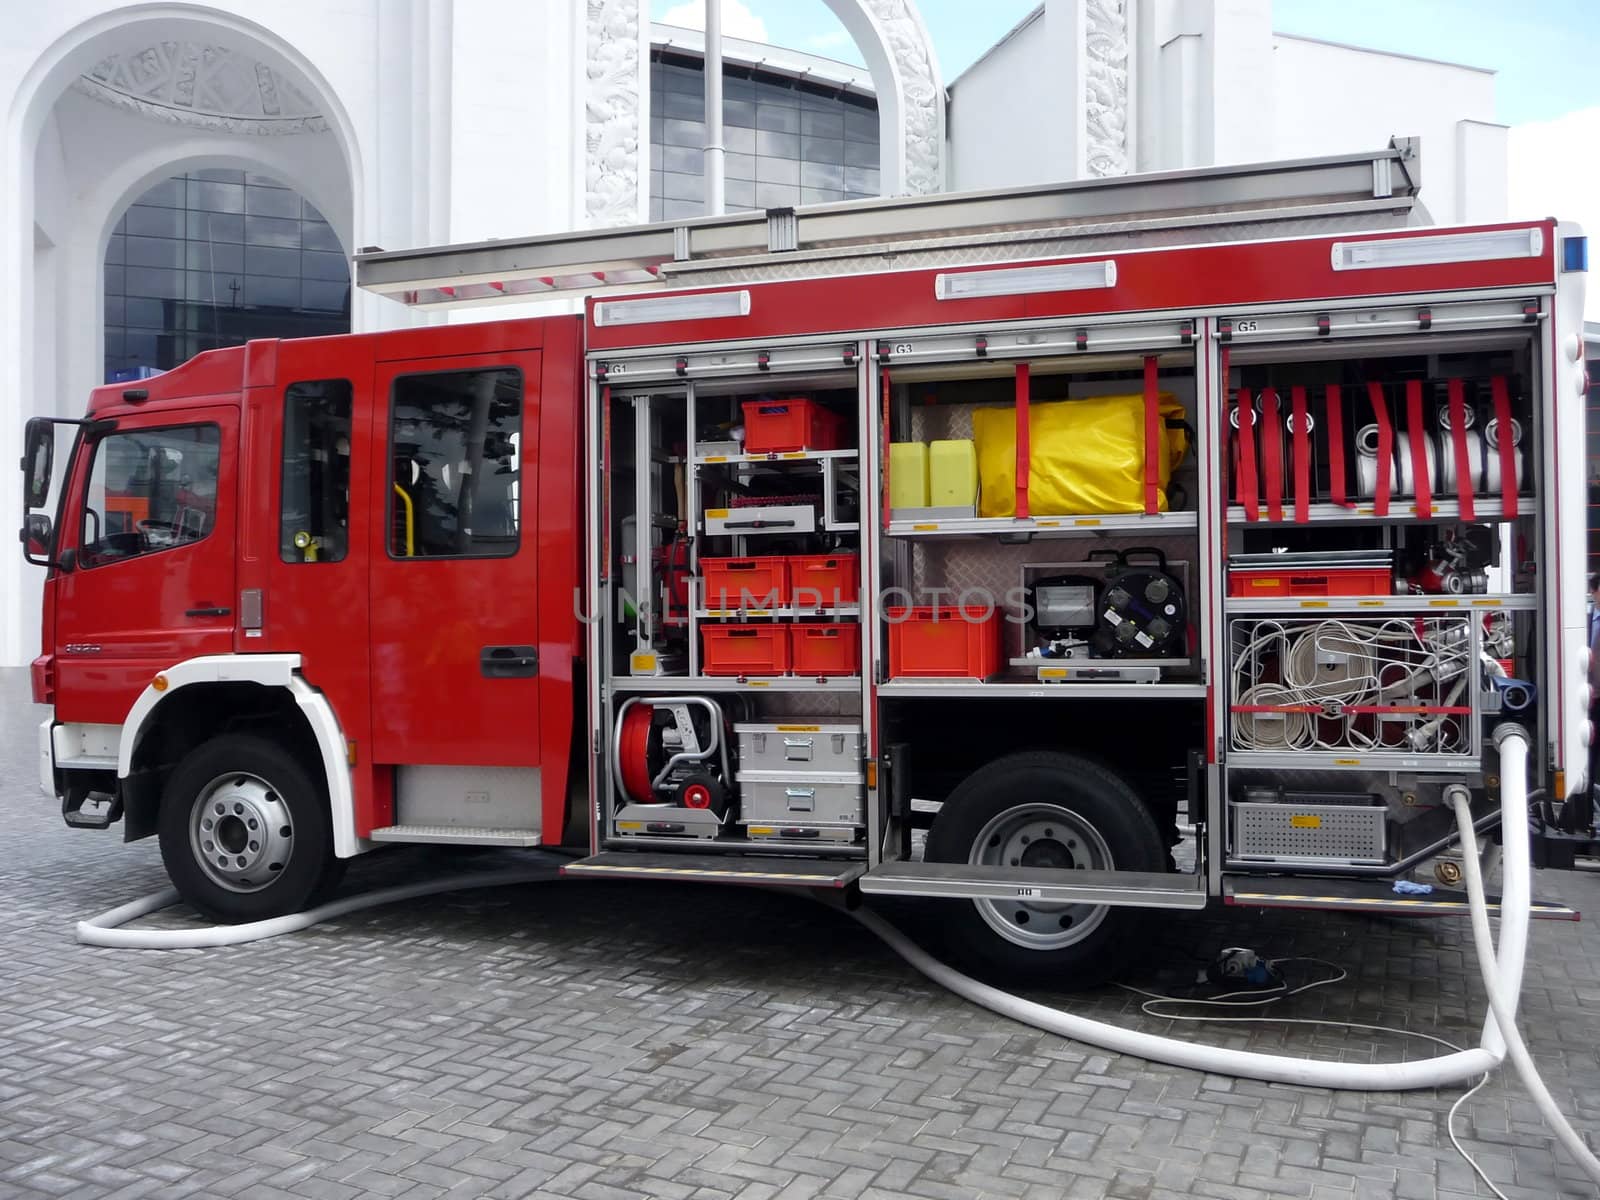 Red fire truck with its full equipment